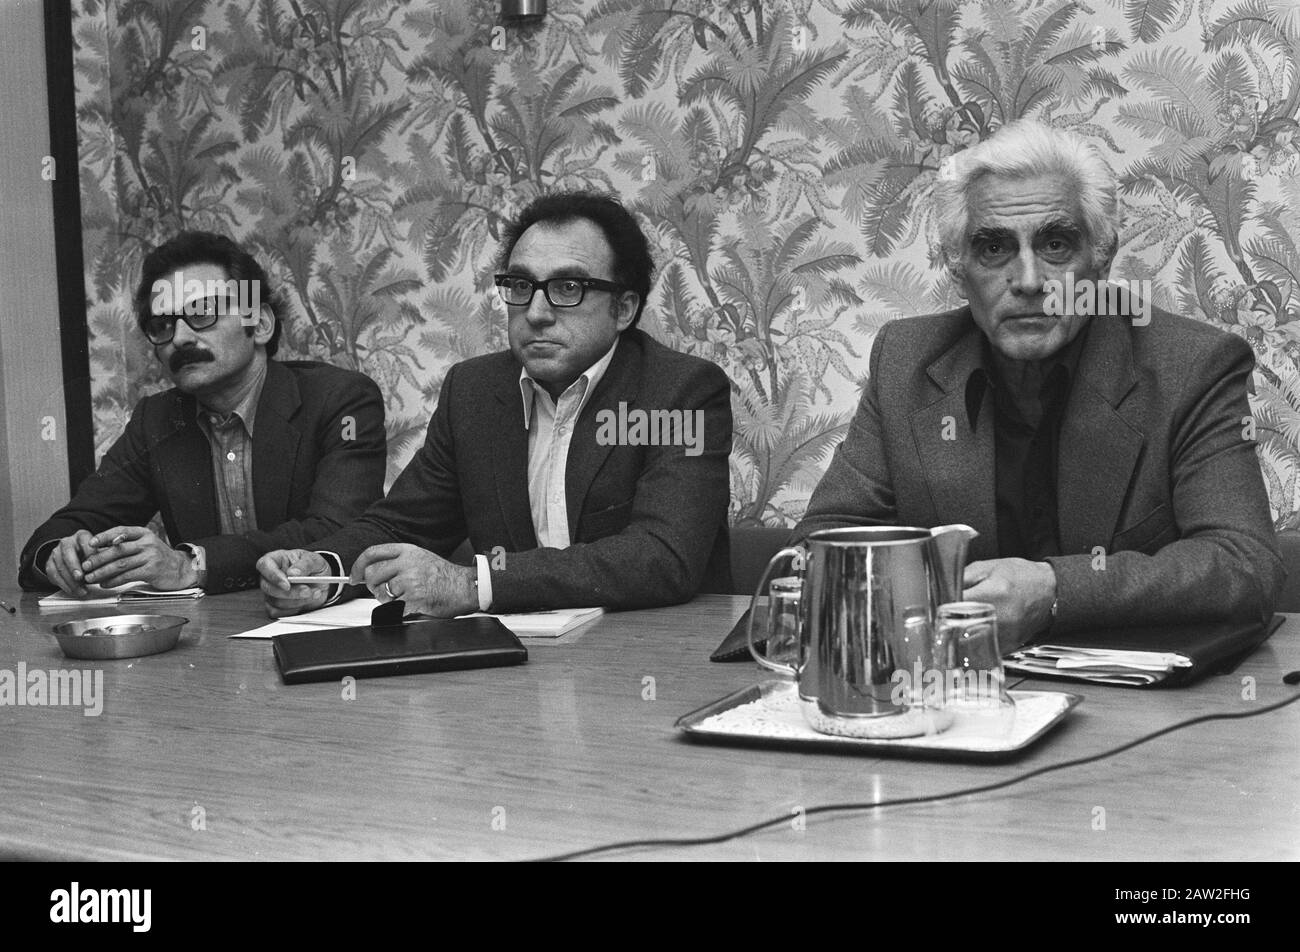 Press conference of the leader of the Portuguese Communist Part ij, Alvaro Cunhal Krasnapolsky in Amsterdam; vlnr Albano Nunes, Domingos Abrantes and Cunhal Date: April 17, 1980 Location: Amsterdam, Noord-Holland Keywords: press conferences, politicians Person Name: Albano Nunes, Cunhal, Alvaro, Domingos Abrantes Stock Photo